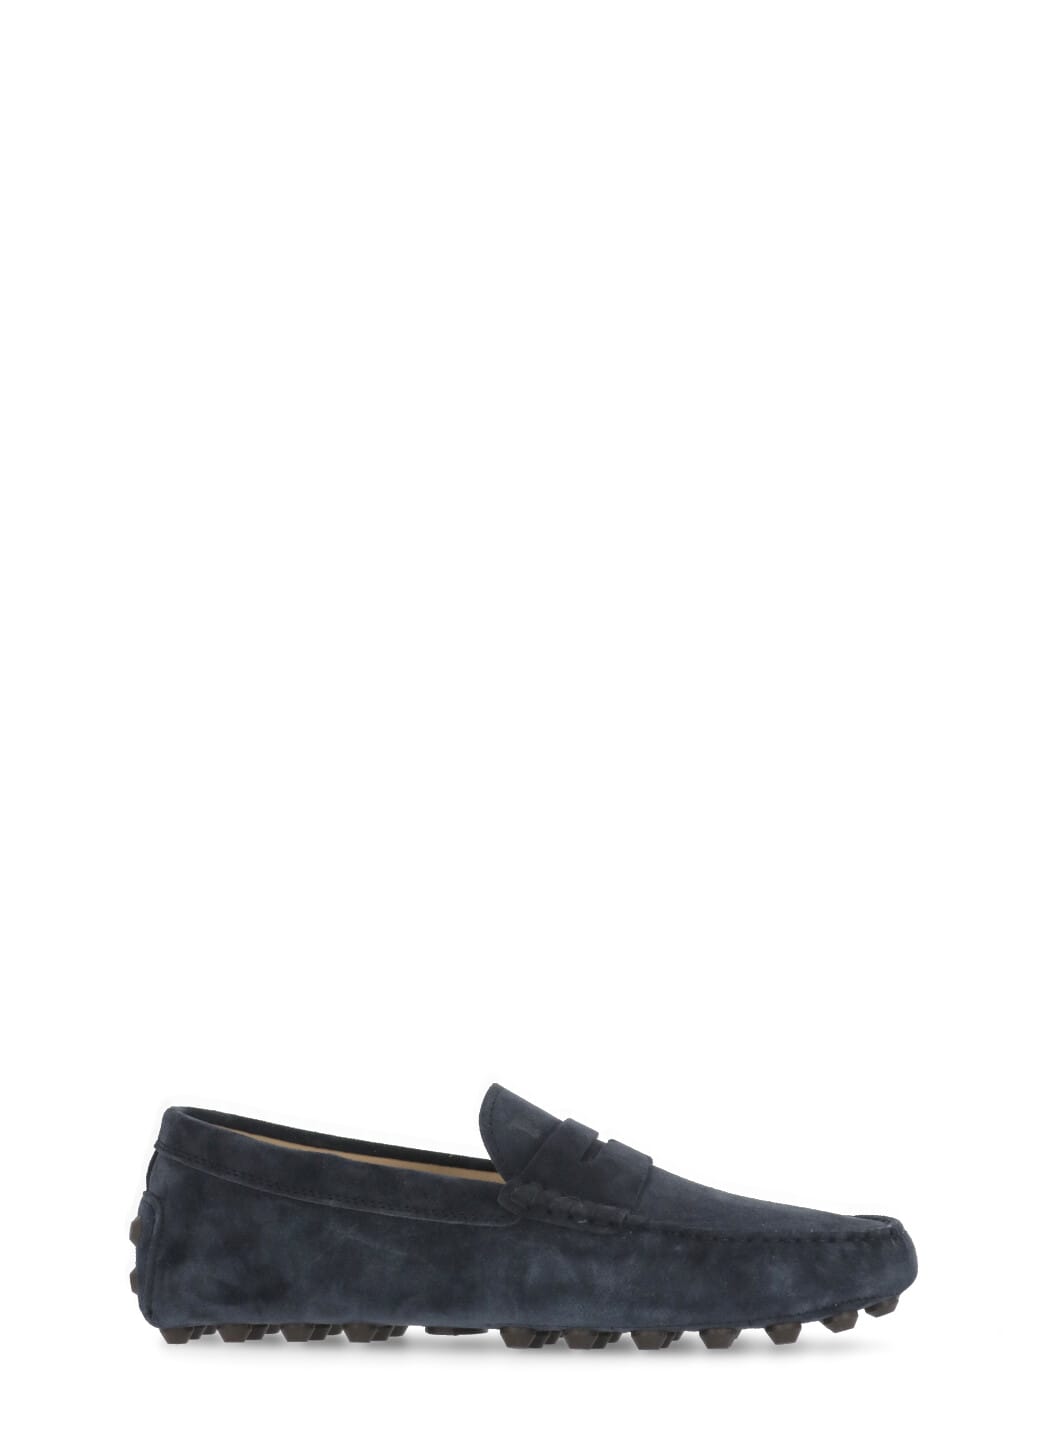 TOD'S SUEDE LEATHER LOAFER